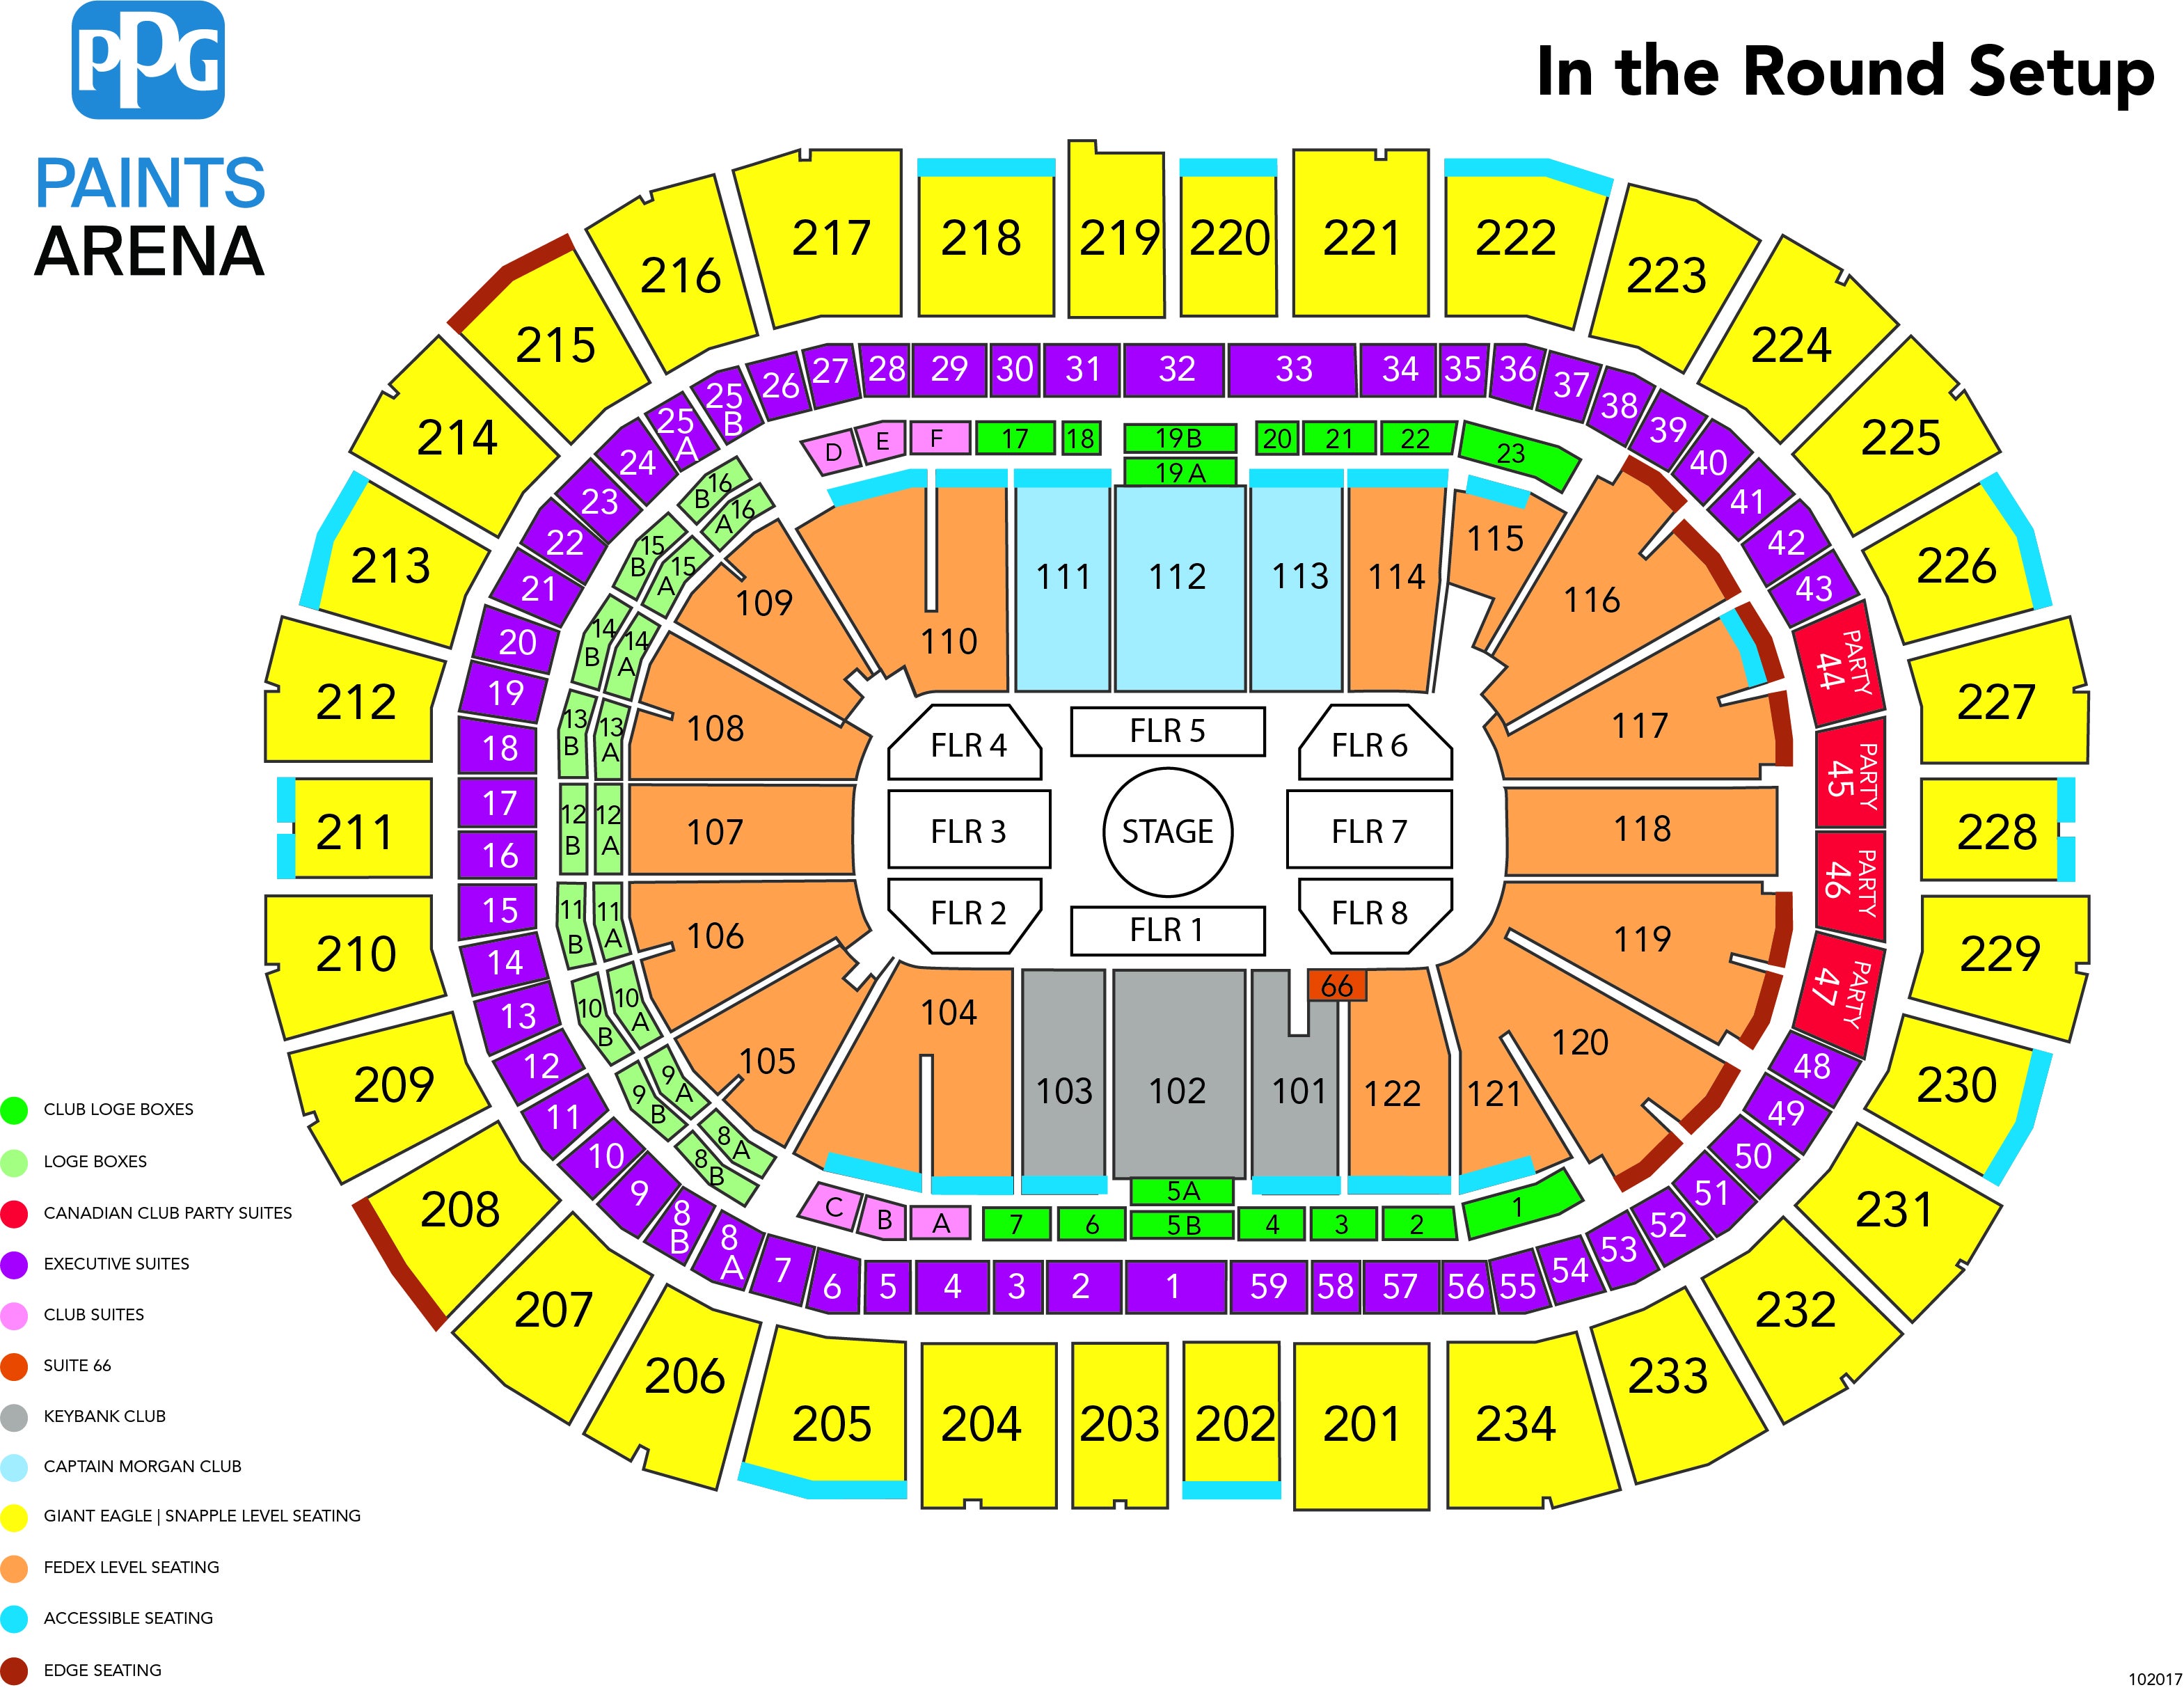 Arena Mexico Seating Chart